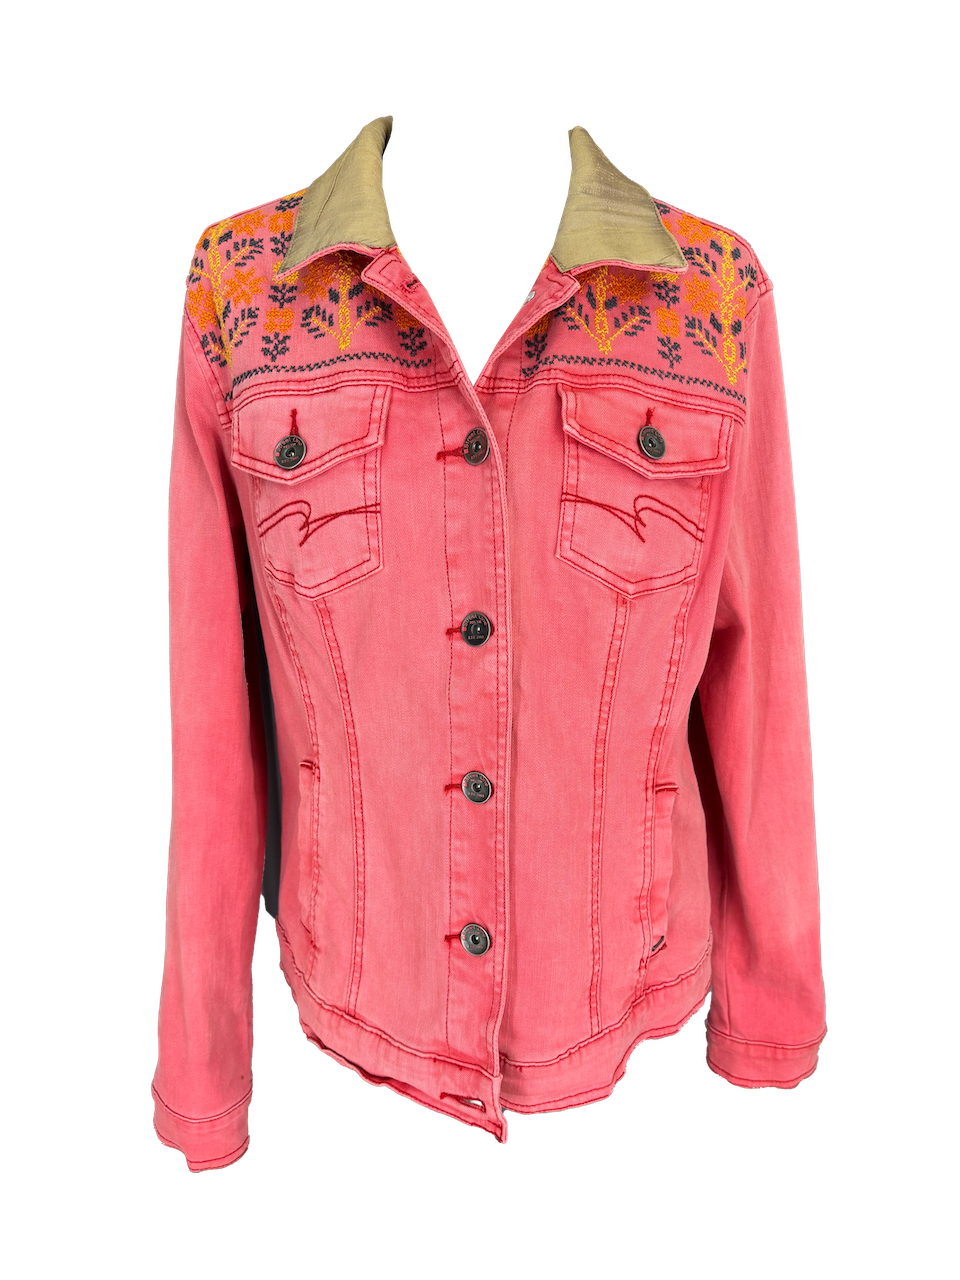 The Heavily Embroidered Denim Jacket in Pink With Thai Silk